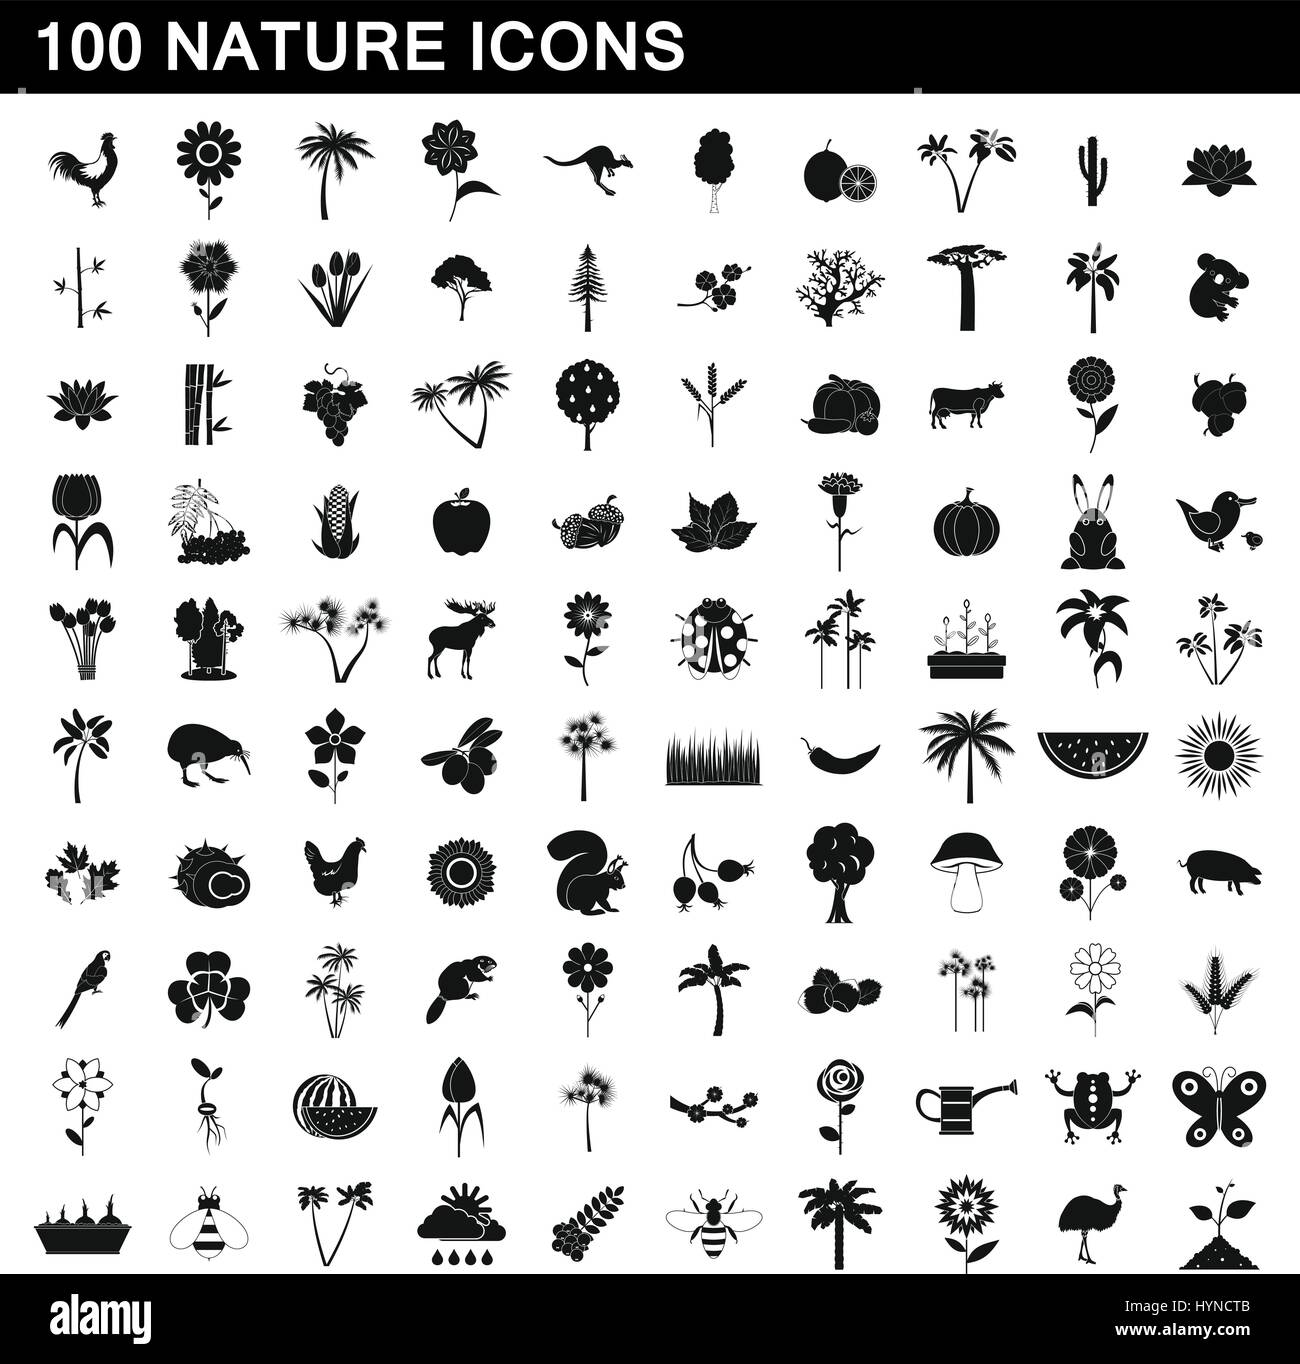 100 nature icons set, simple style Stock Vector